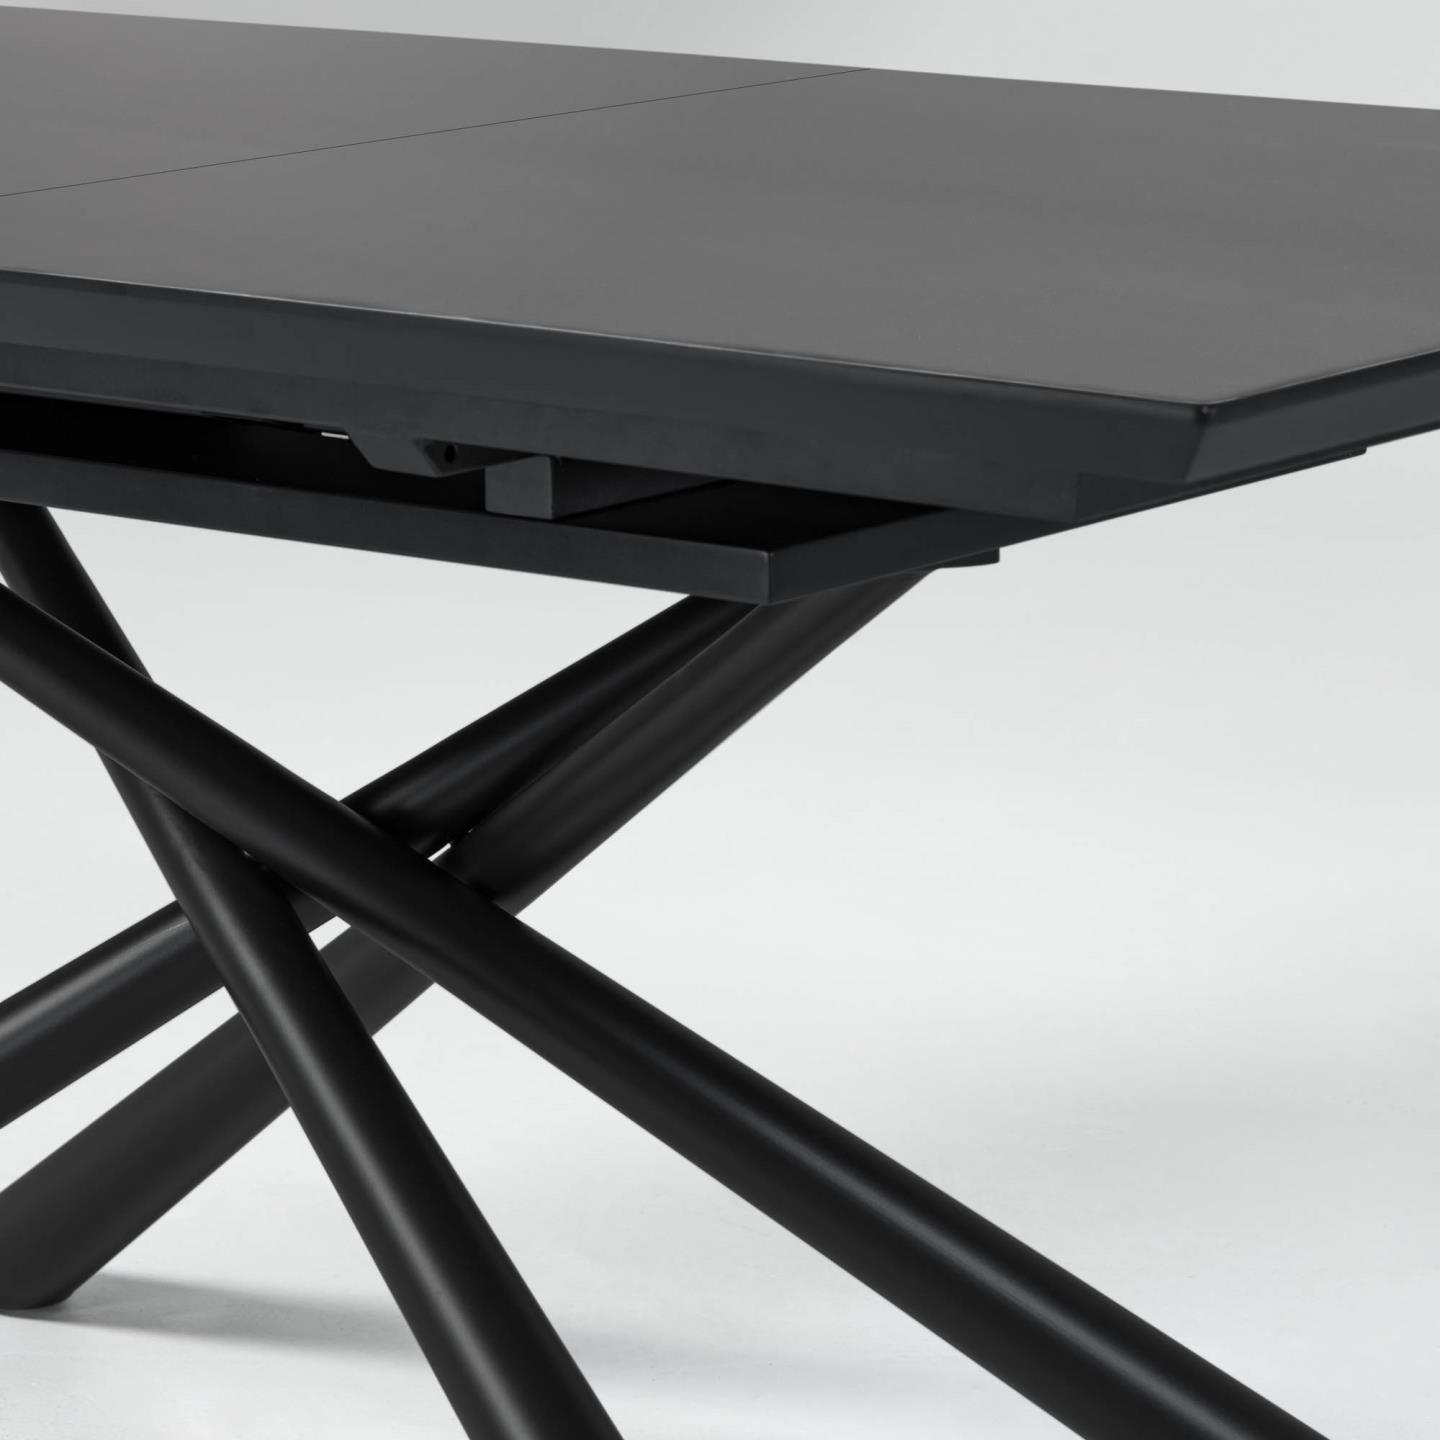 Theone extendable glass table with steel legs with black finish 160 (210) x 90 cm